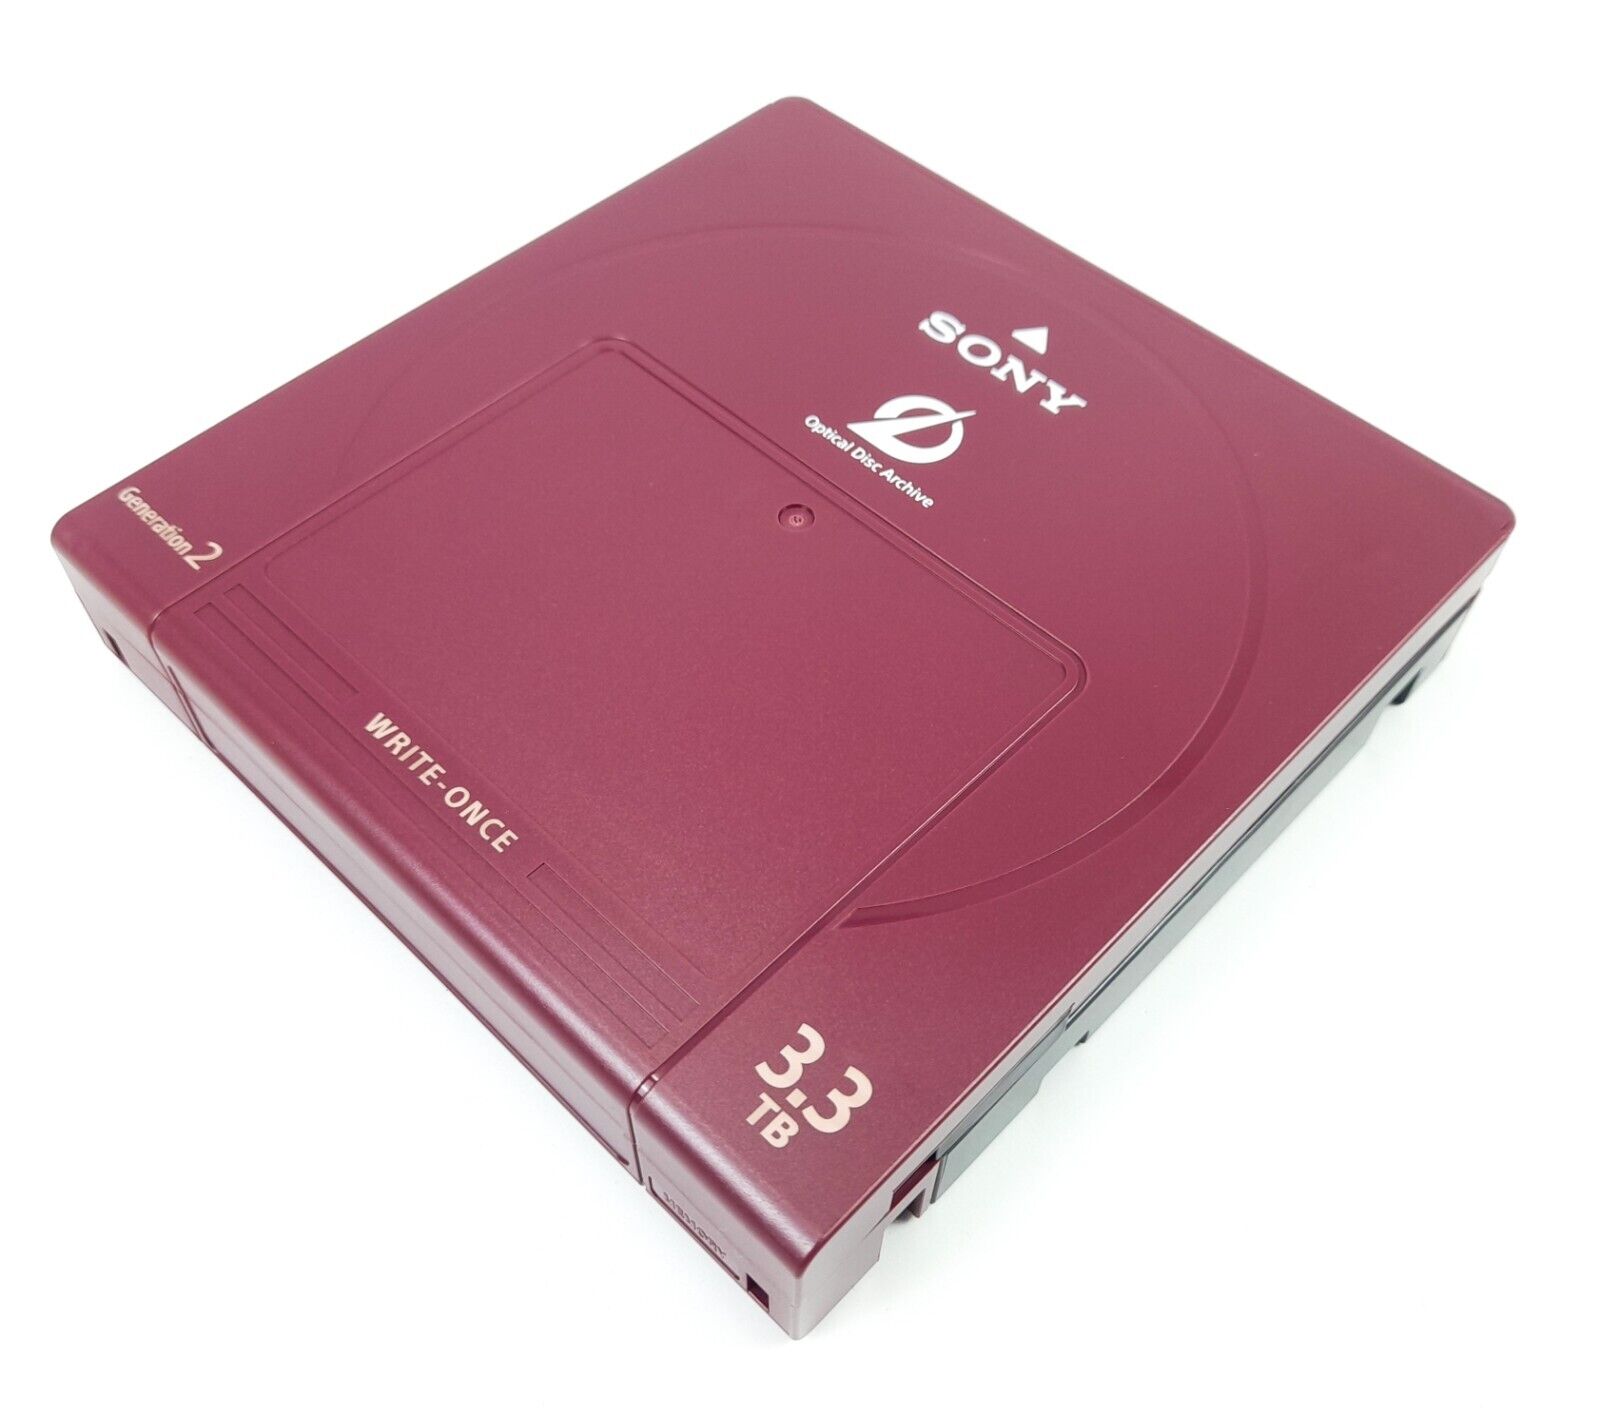 Sony 3.3TB Write-Once Optical Recording Disk Cartridge Gen 2